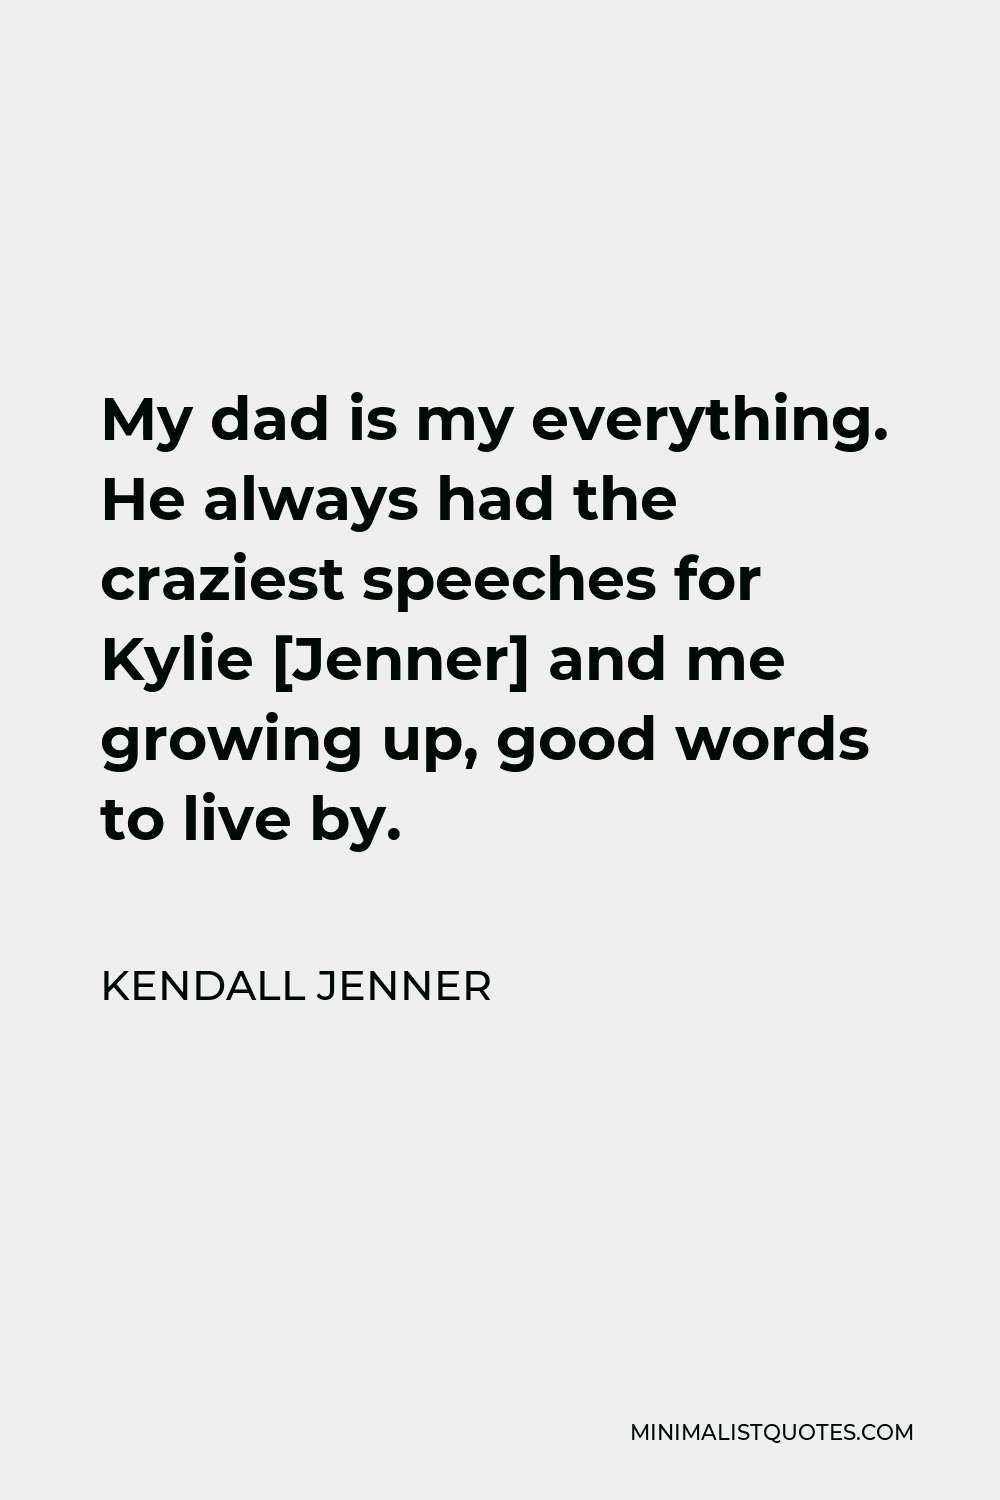 Kendall Jenner Quote - My dad is my everything. He always had the craziest speeches for Kylie [Jenner] and me growing up, good words to live by.